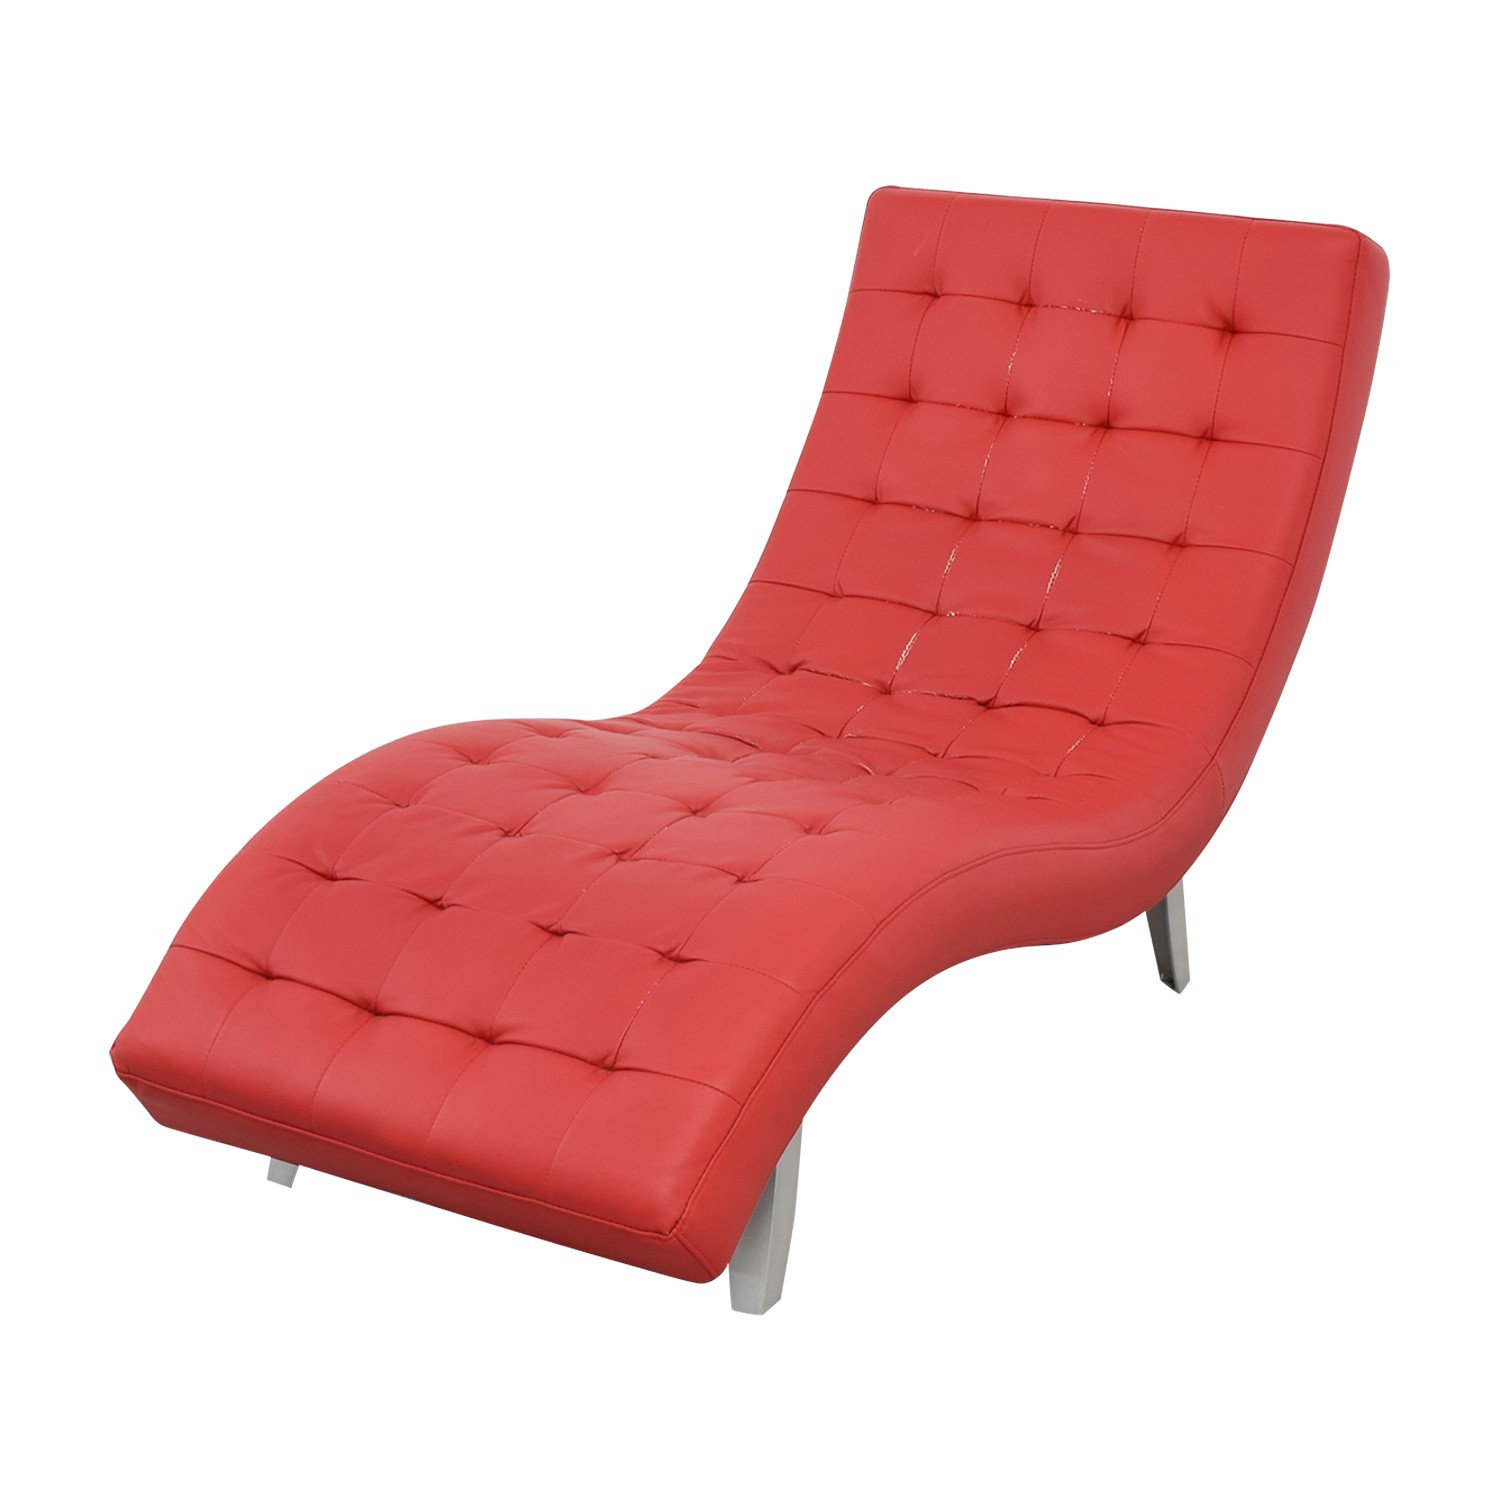 88 off red tufted chaise lounge sofas 1